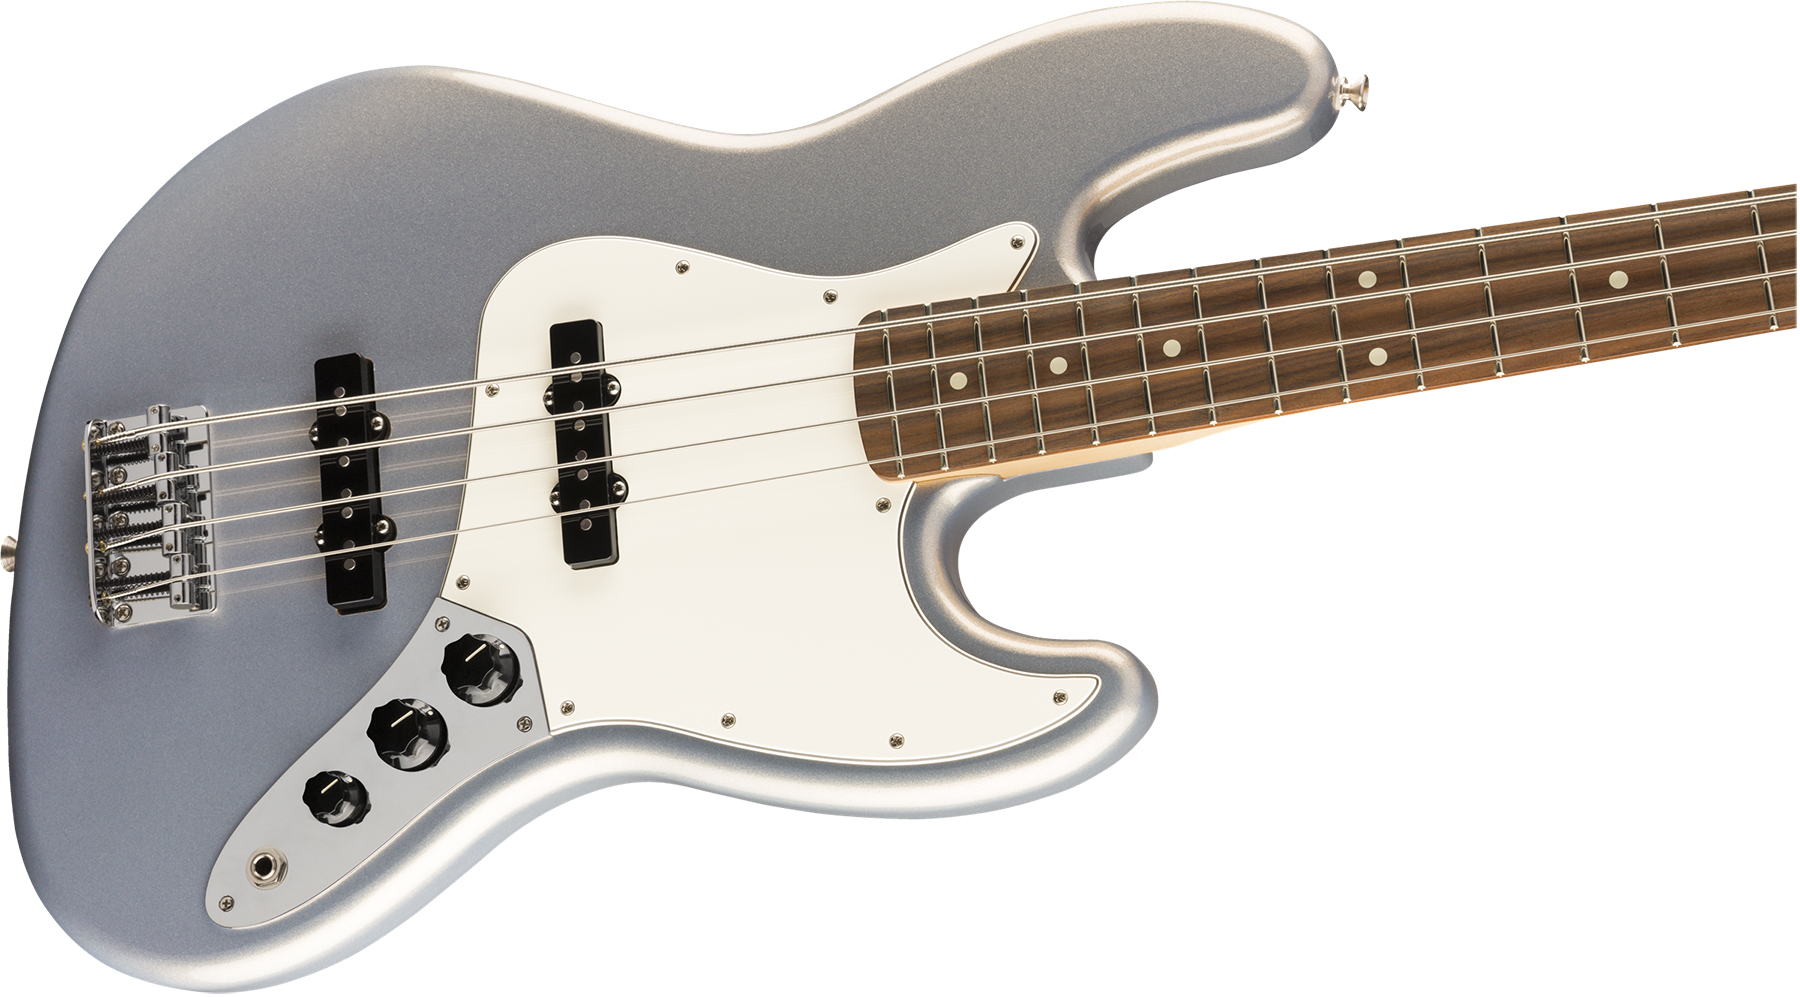 Fender Jazz Bass Player Mex Pf - Silver - Solid body electric bass - Variation 2